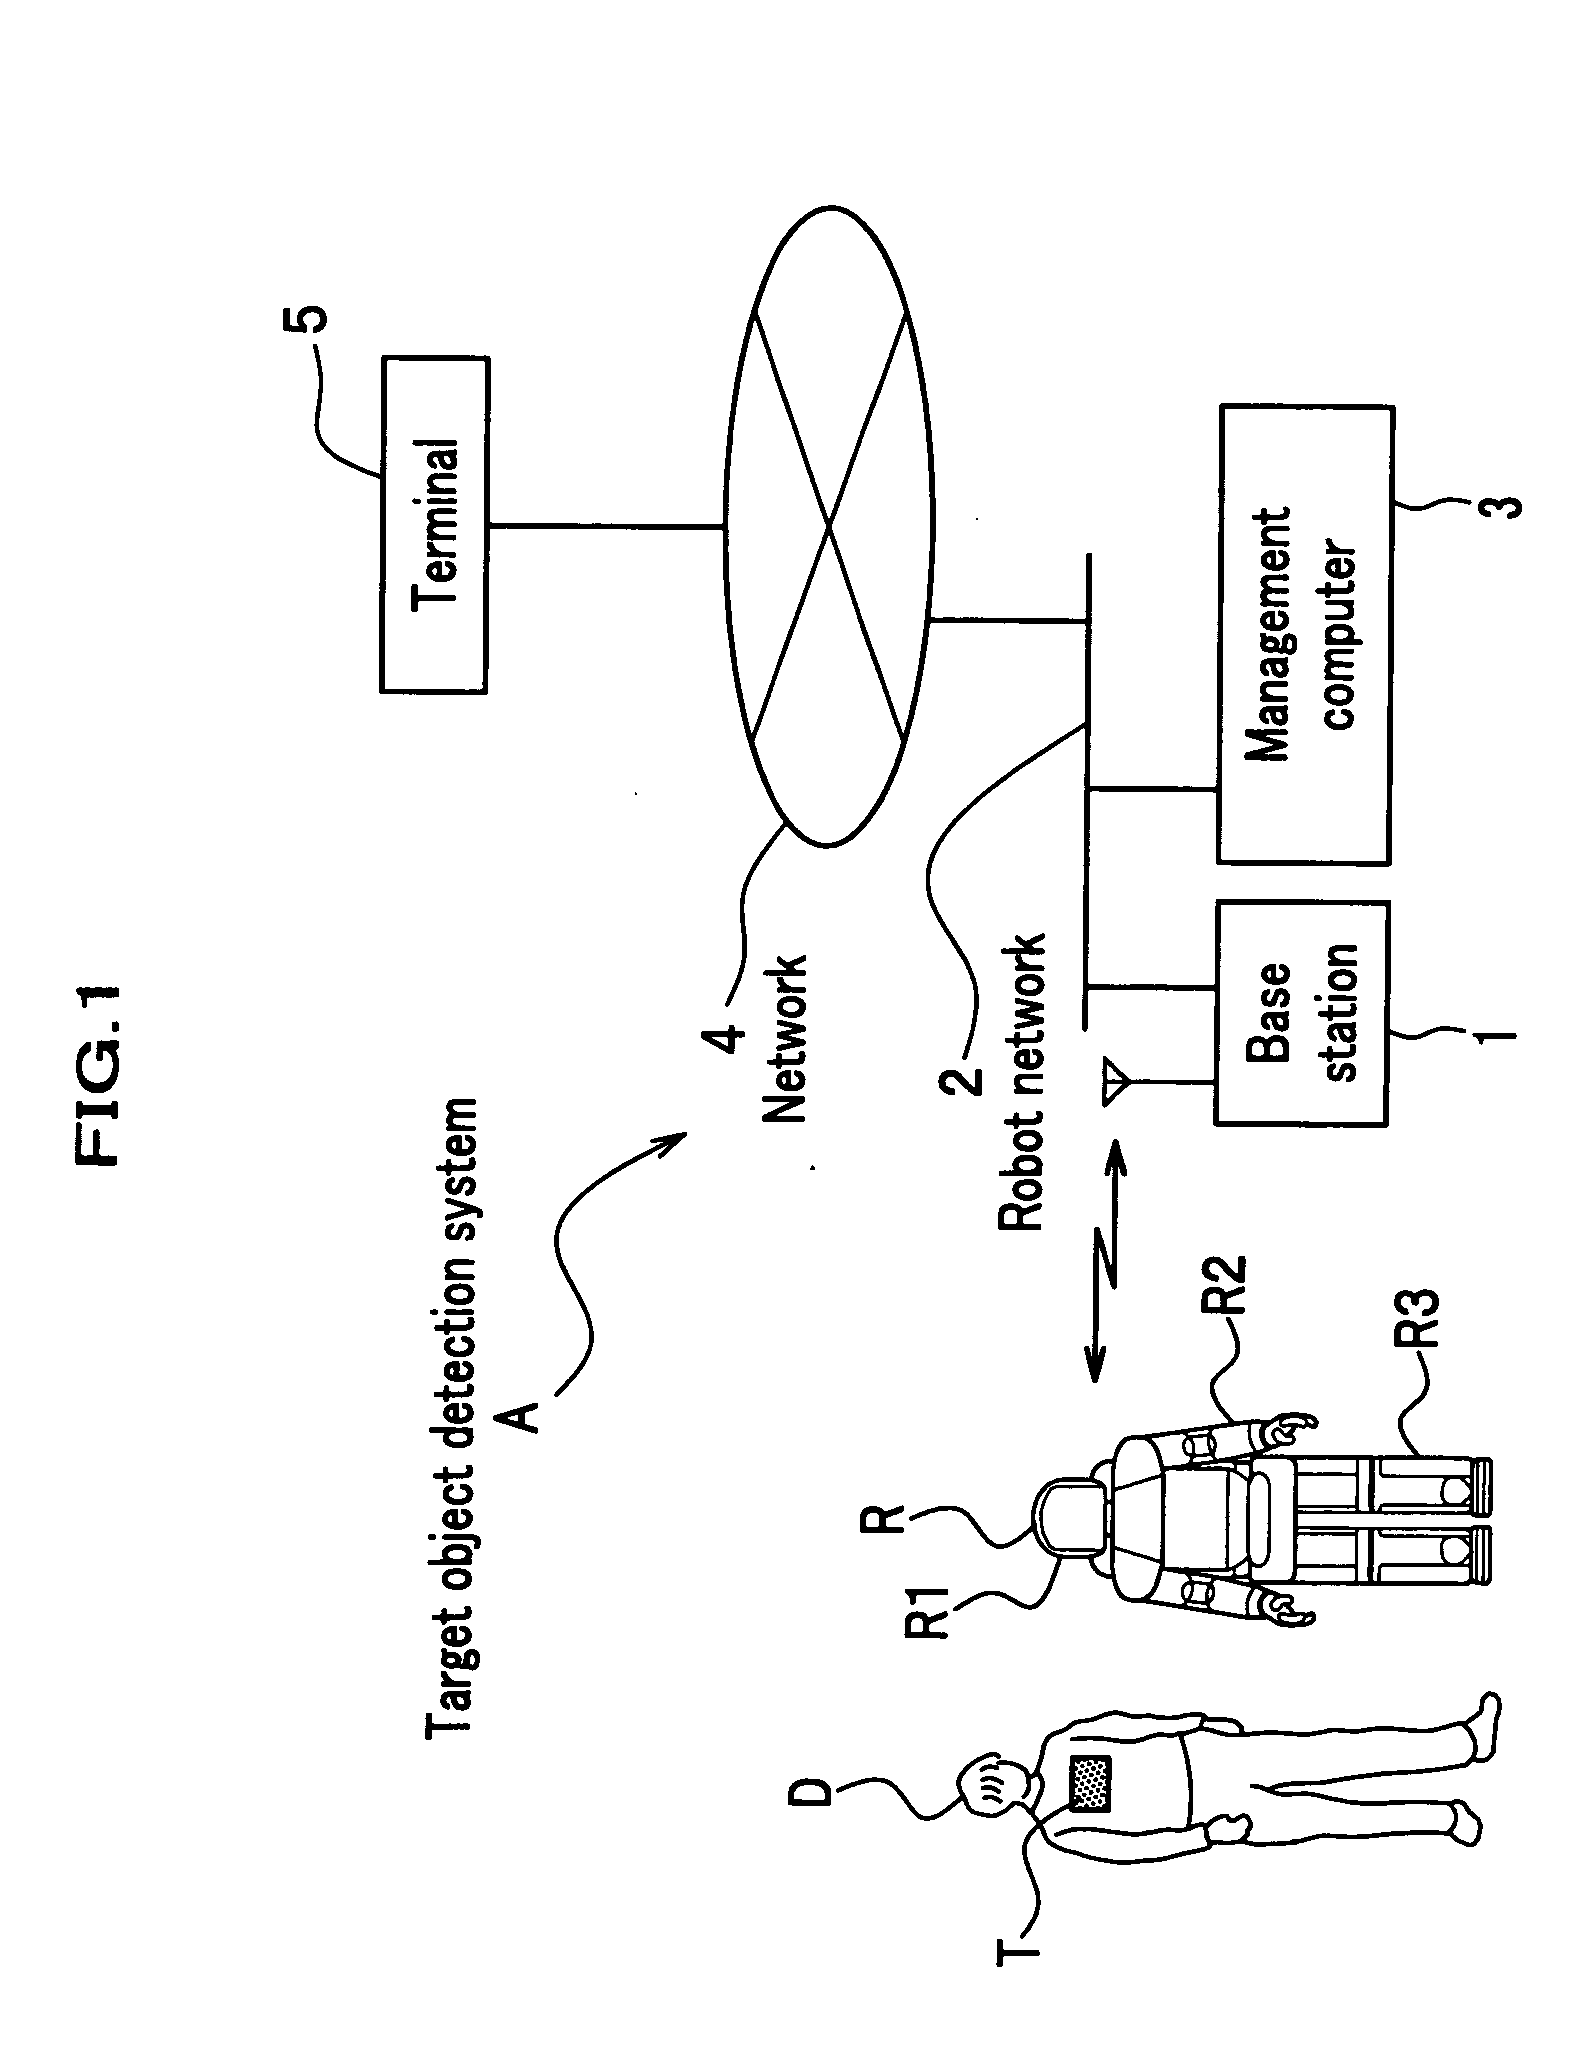 Target object detection apparatus and robot provided with the same